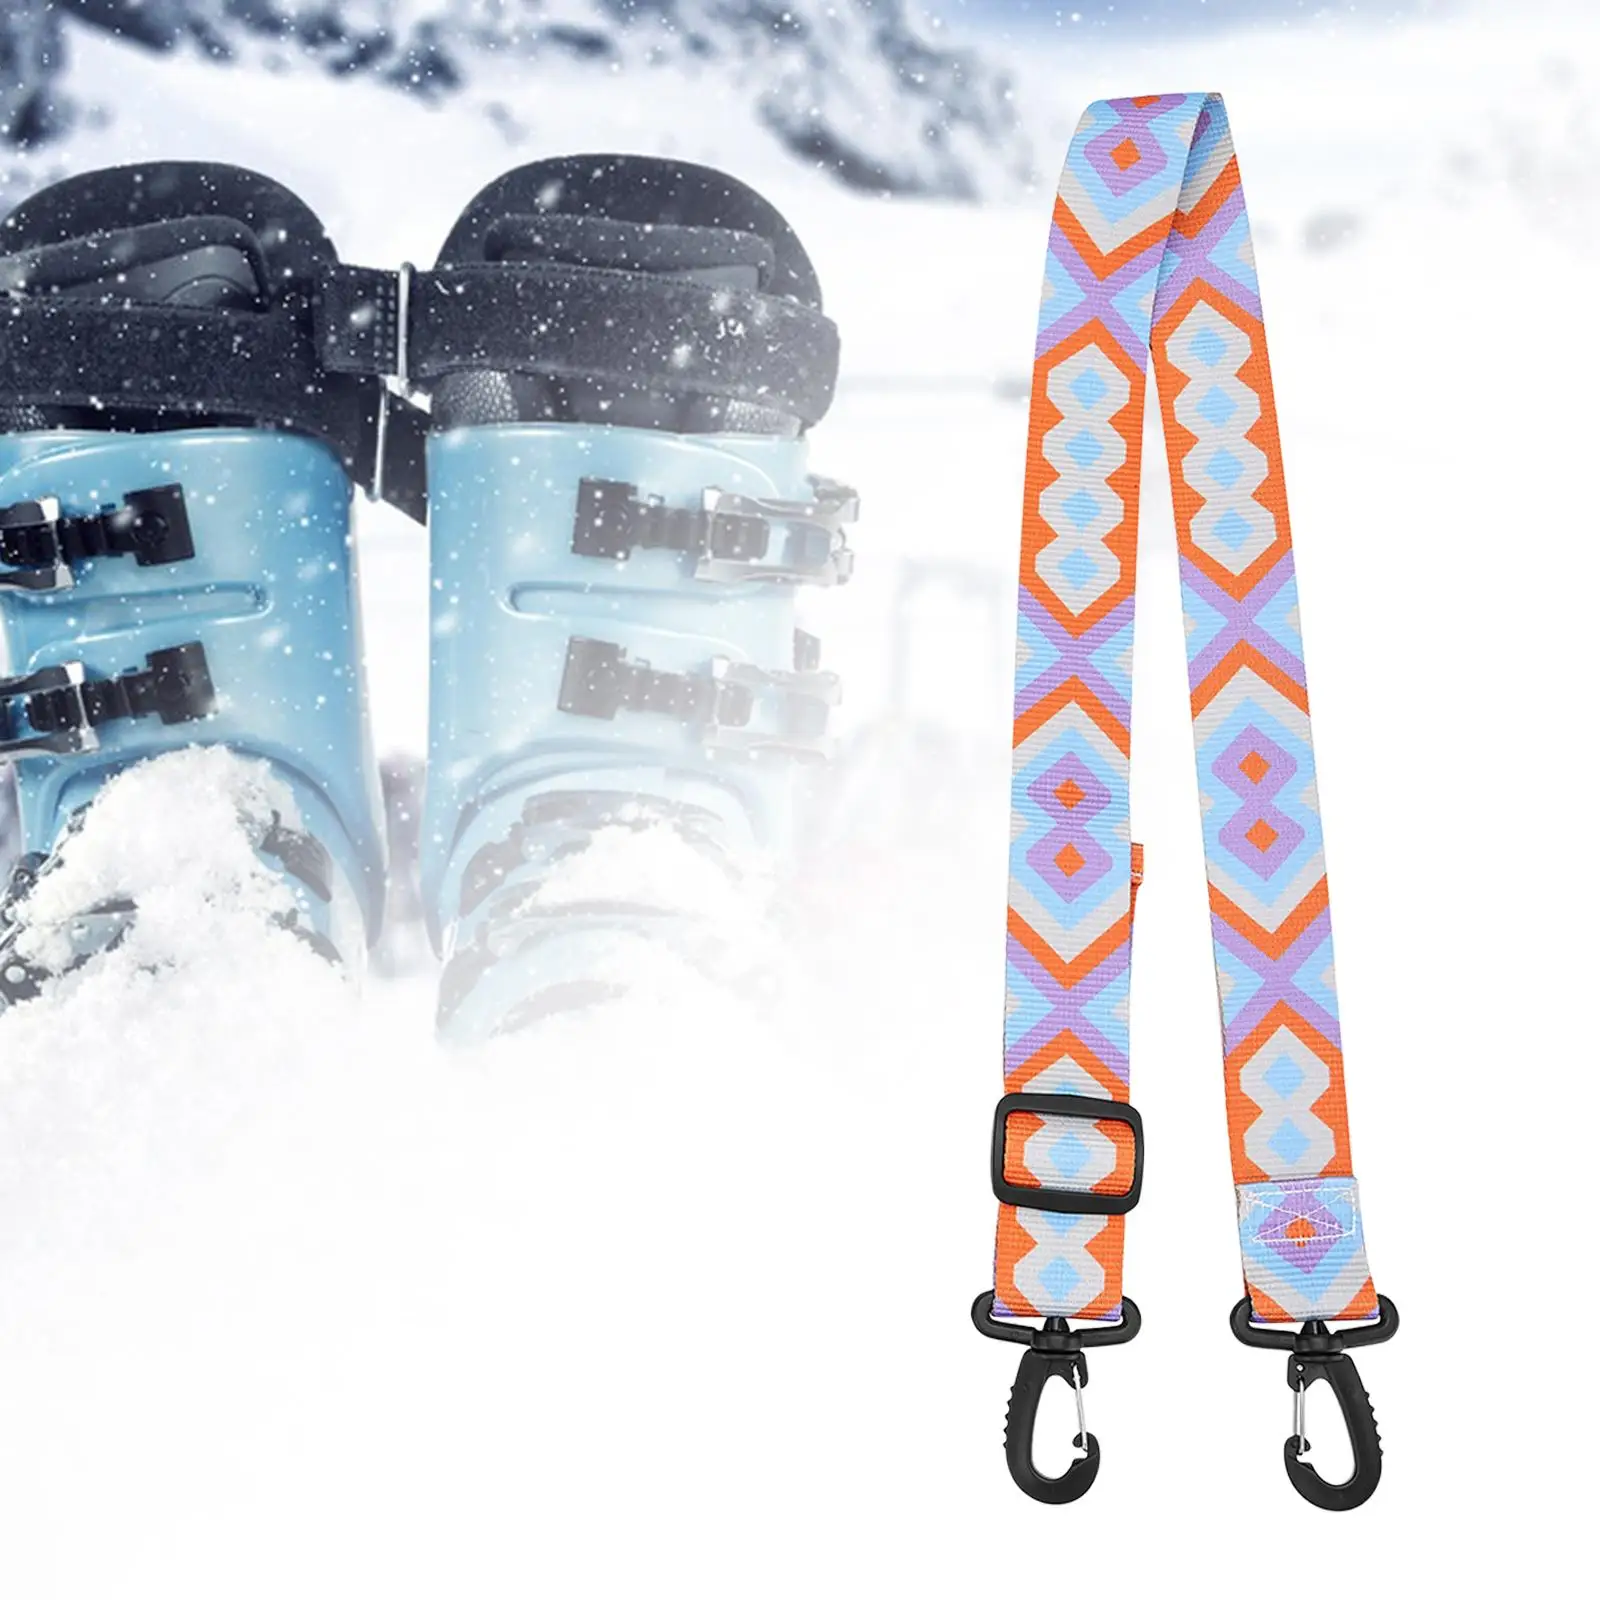 Ski Boot Strap Adjustable Snowboard Boot Carrier Strap for Skiing Bags Equipment